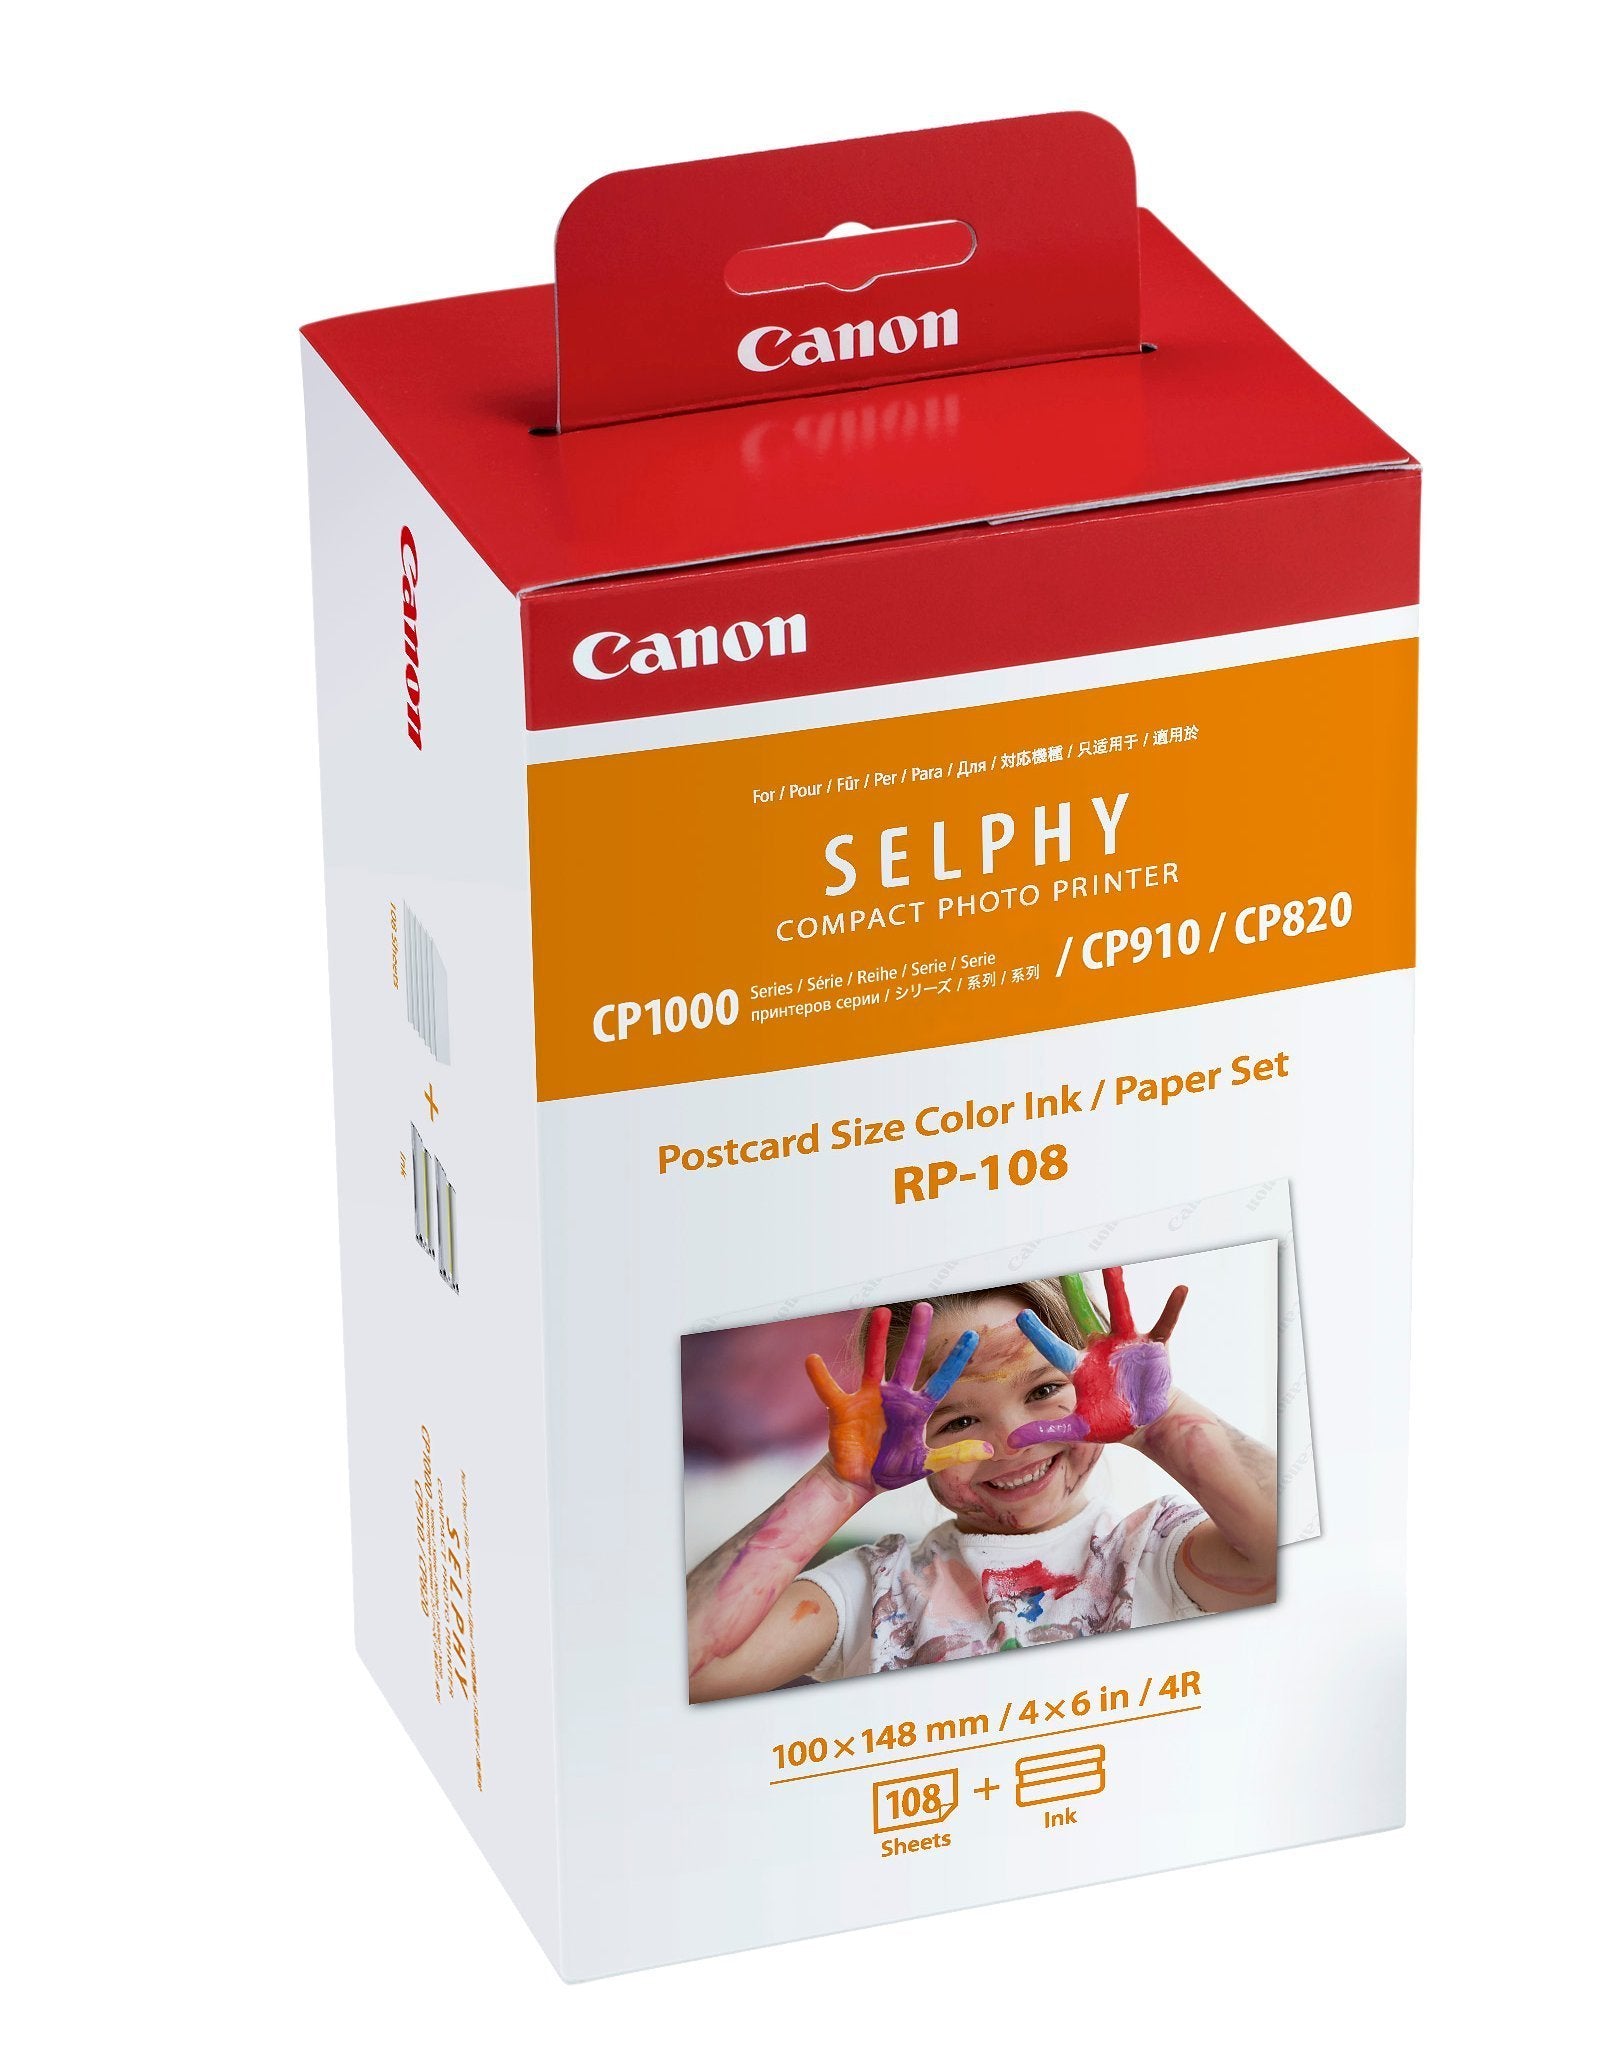 Canon RP-108 High-Capacity Color Ink/Paper Set for SELPHY CP910 Printer